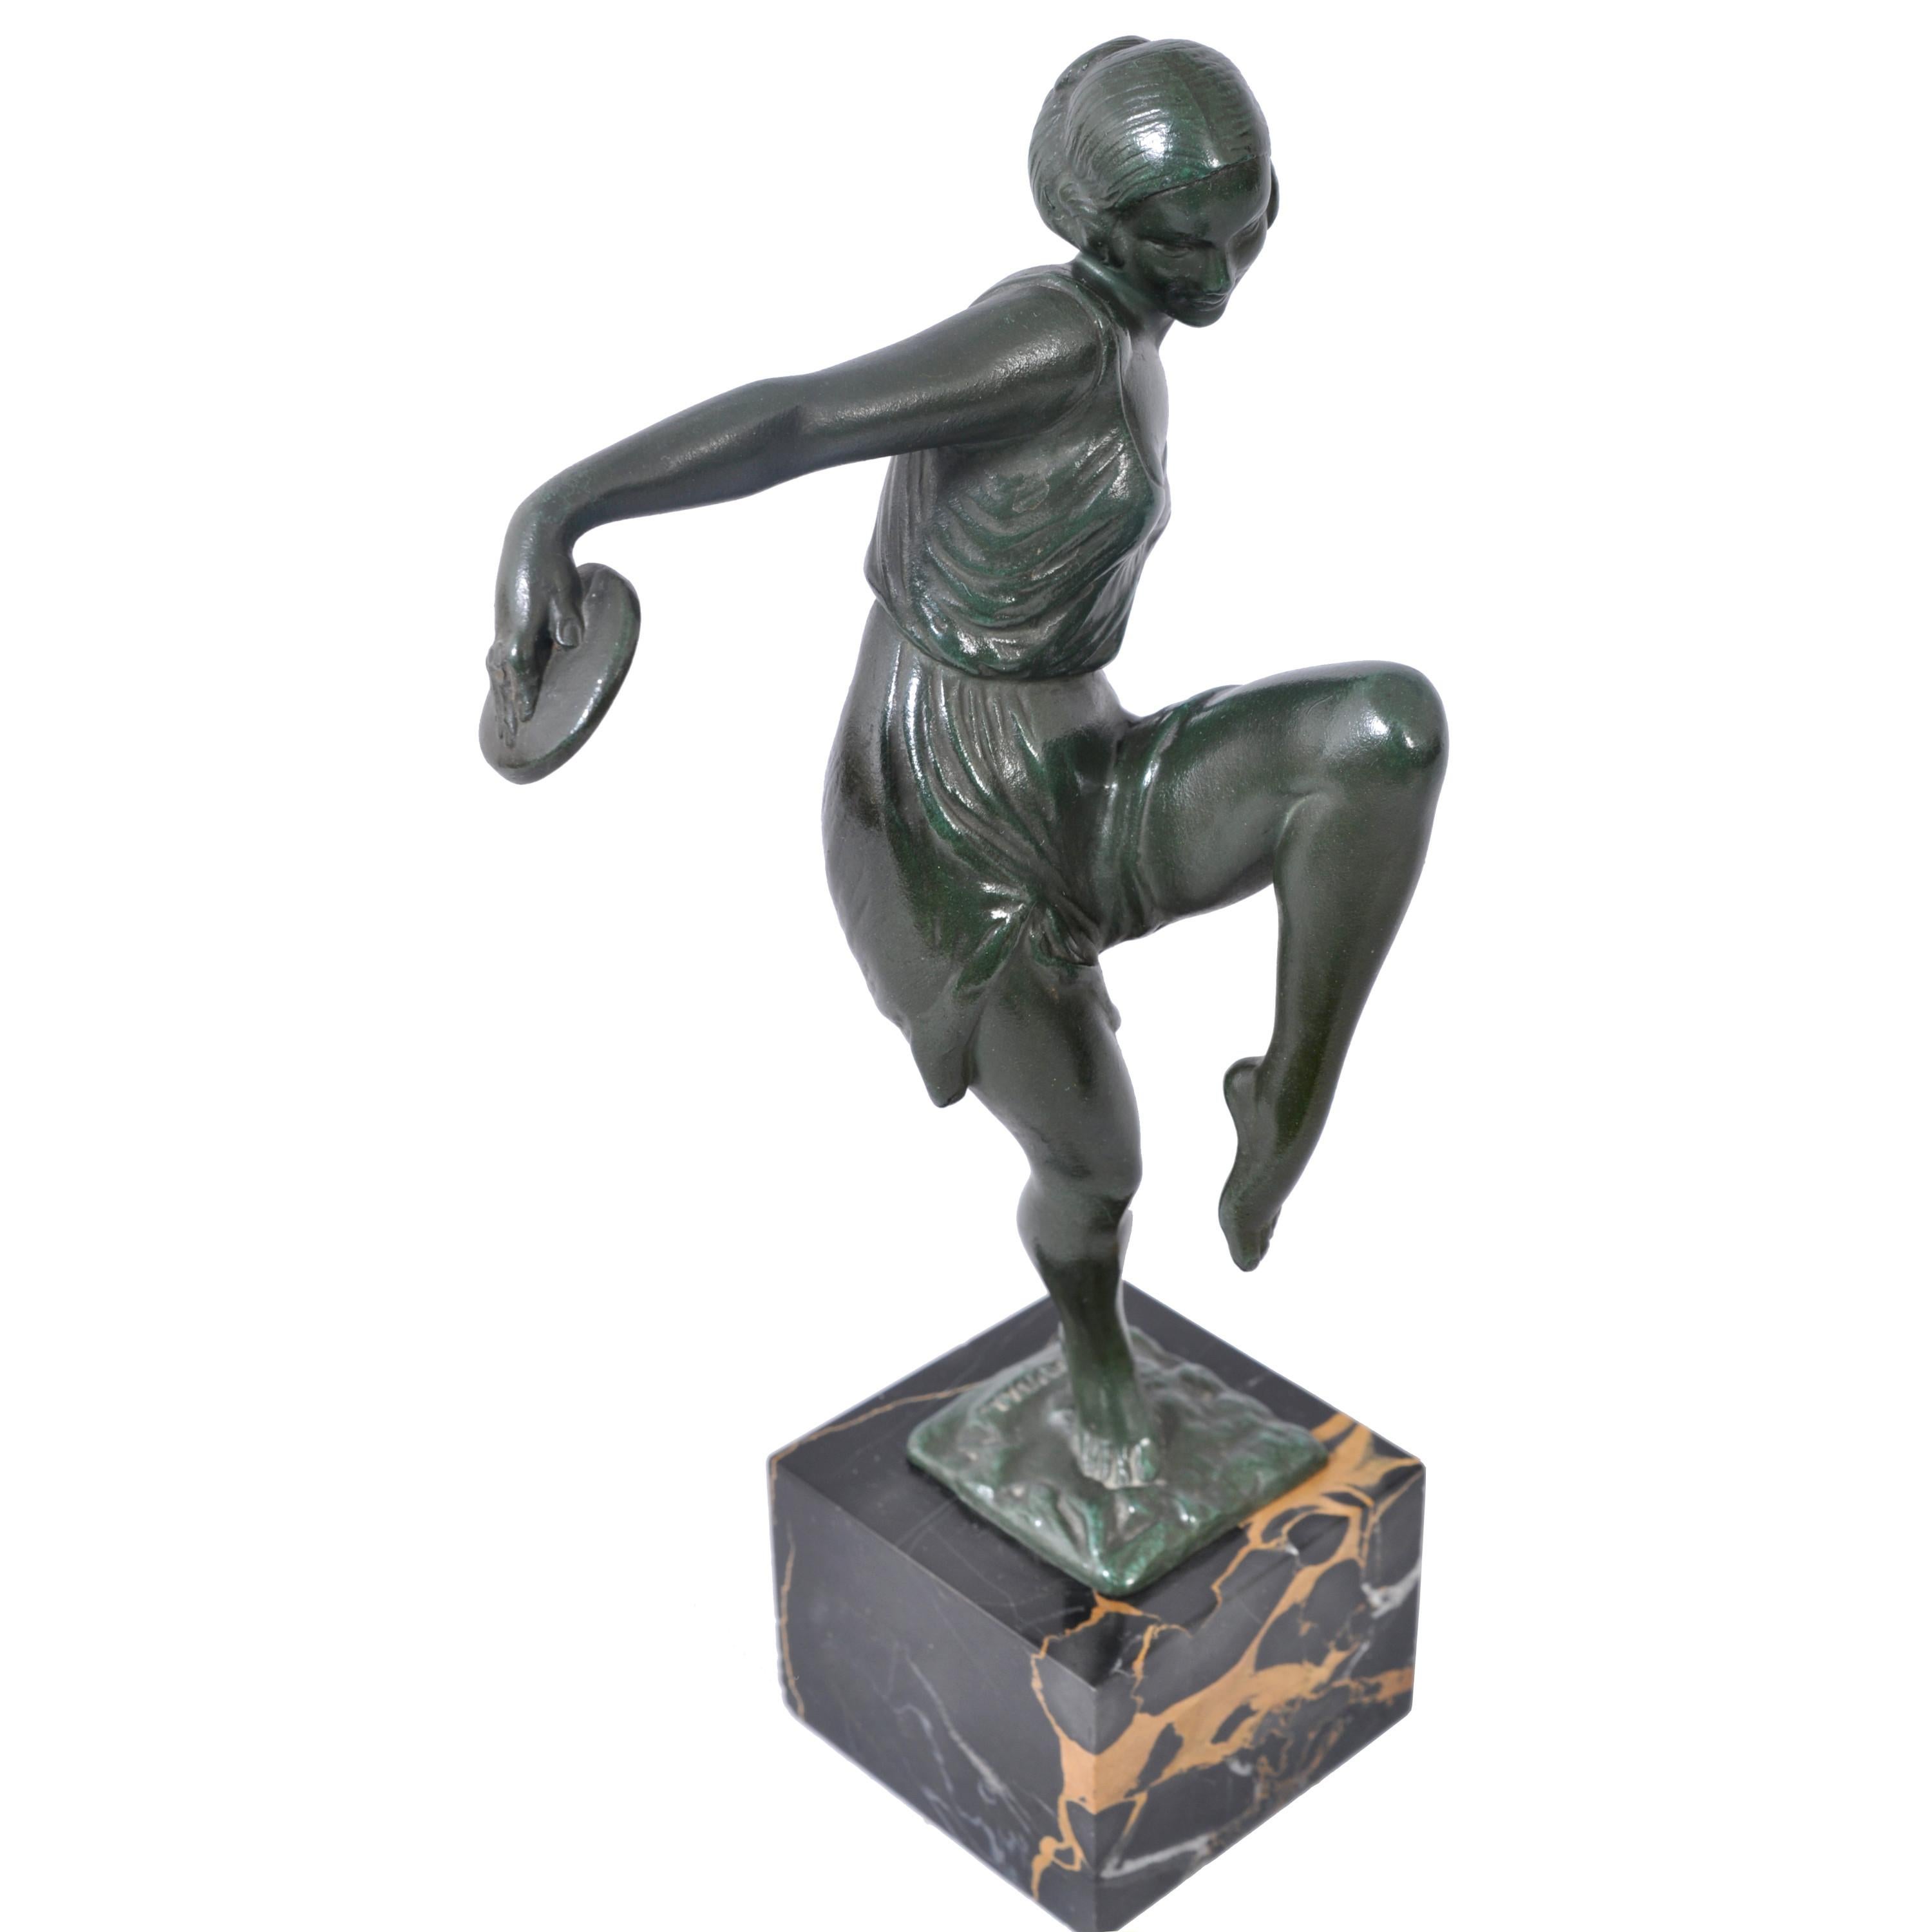 Early 20th Century French Art Deco Bronze Female Cymbal Dancer Statue Figure Pierre Le Faguays 1925